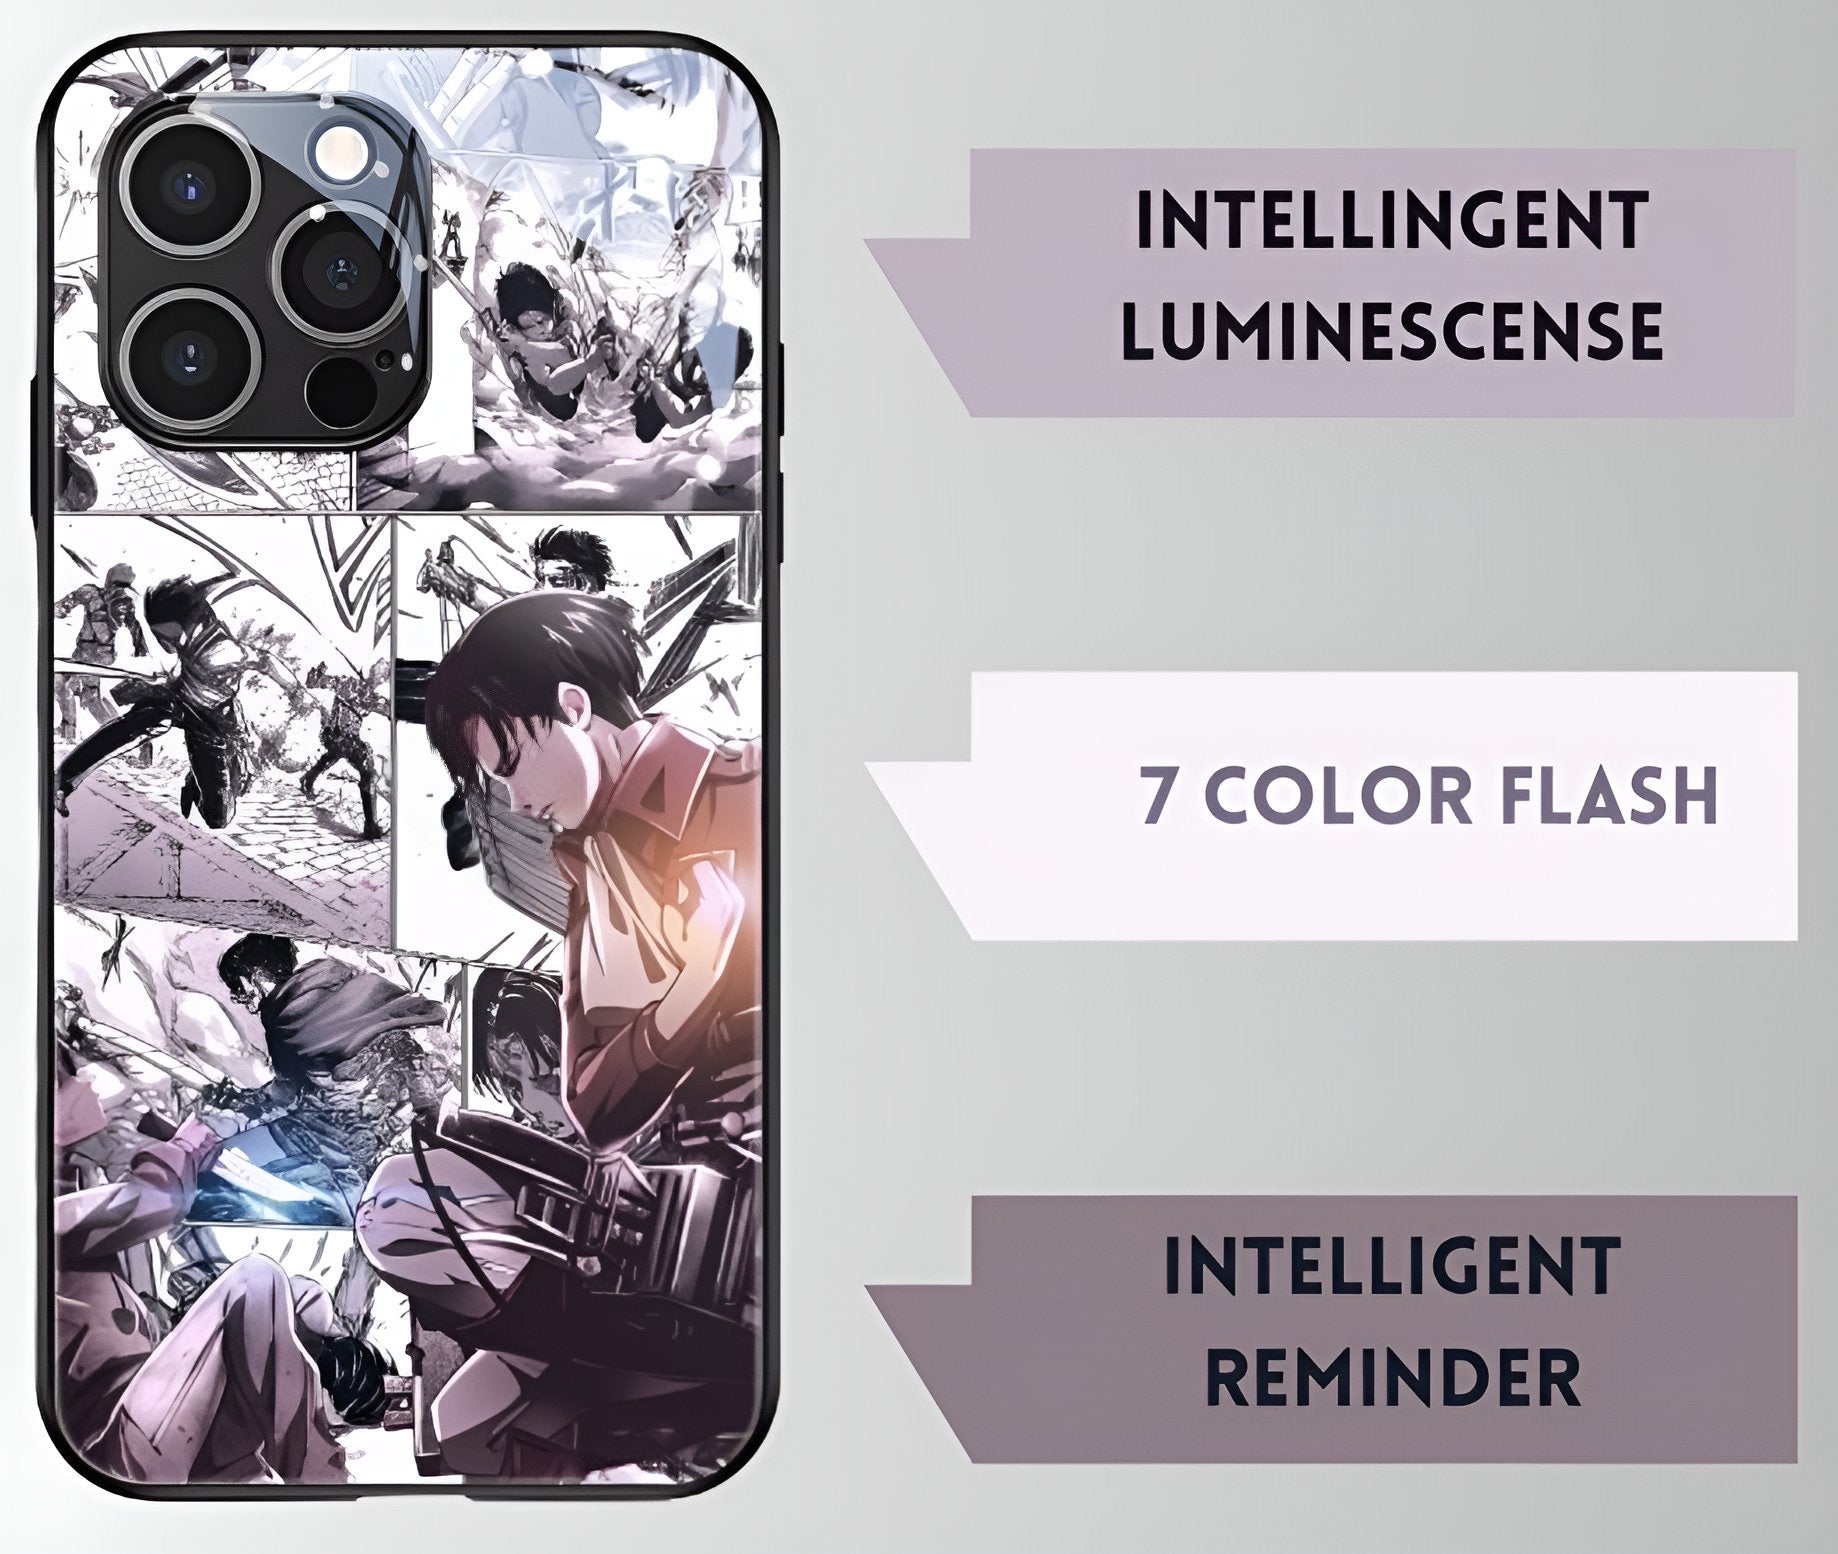 Luxury Light Led Case - Attack on Titan Edition - more cases inside